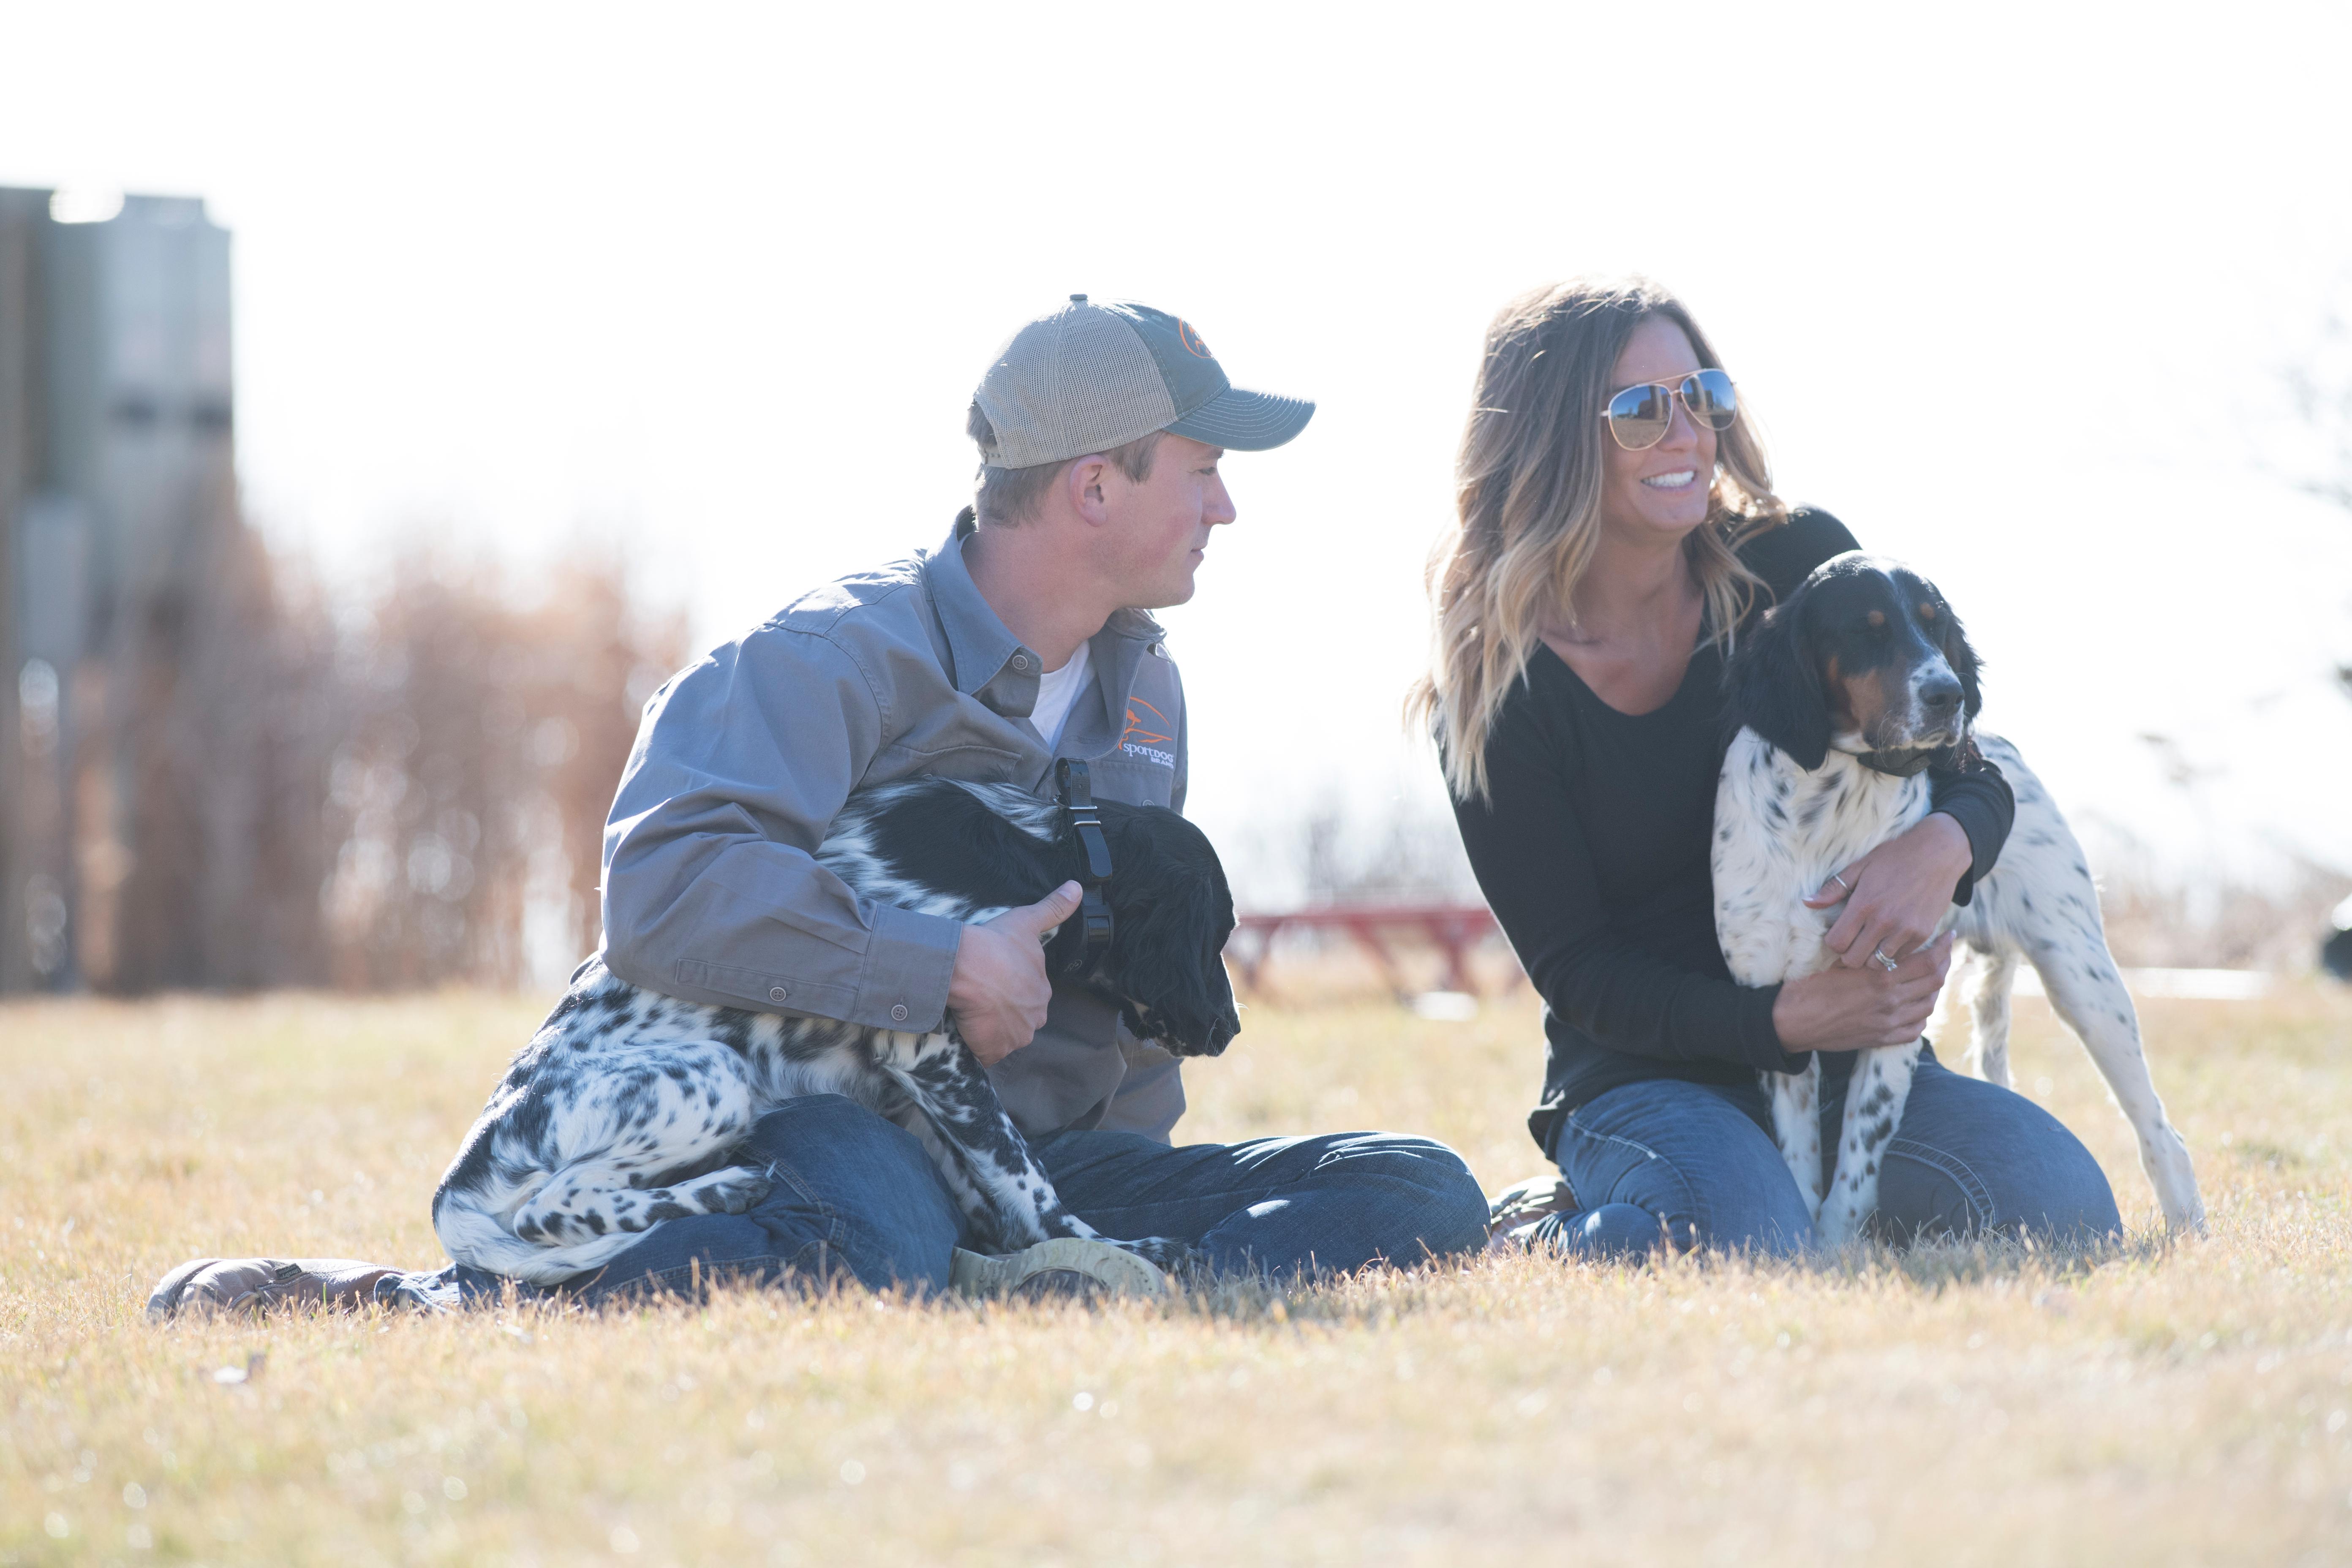 Man and woman sitting in grass with two setter puppies.